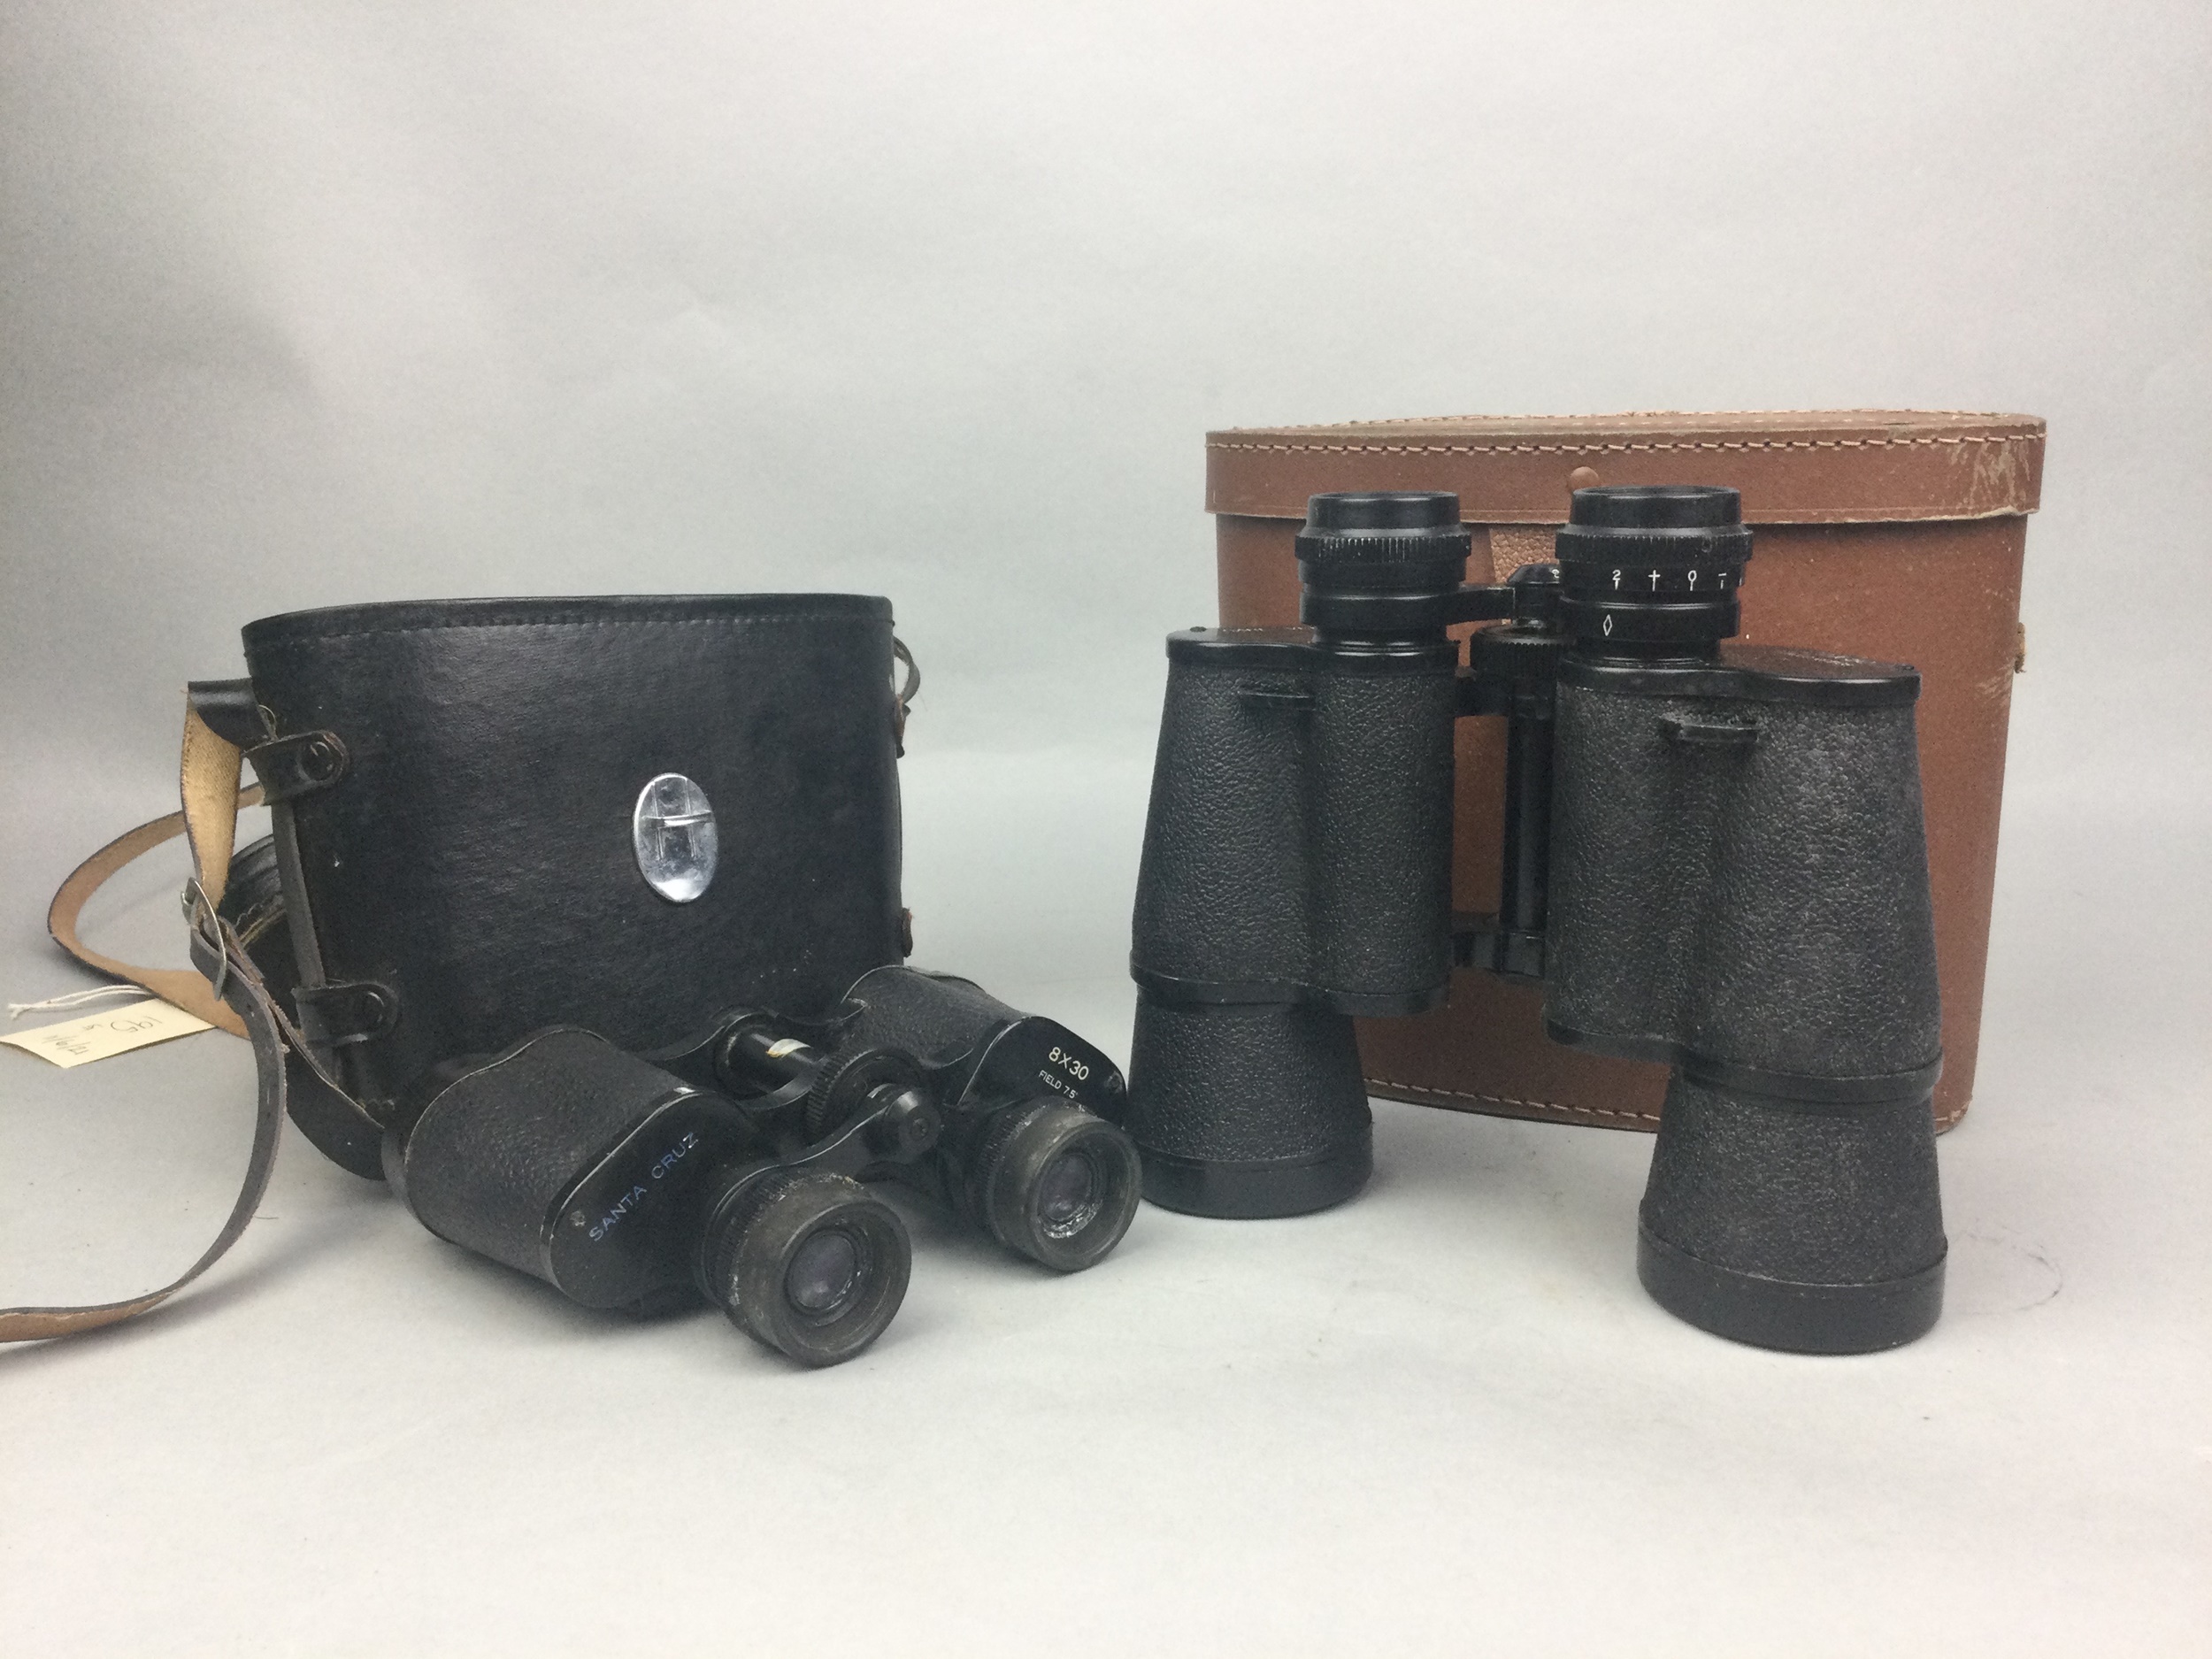 A PAIR OF SANTA CRUZ 8X30 FIELD GLASSES AND OTHER ITEMS